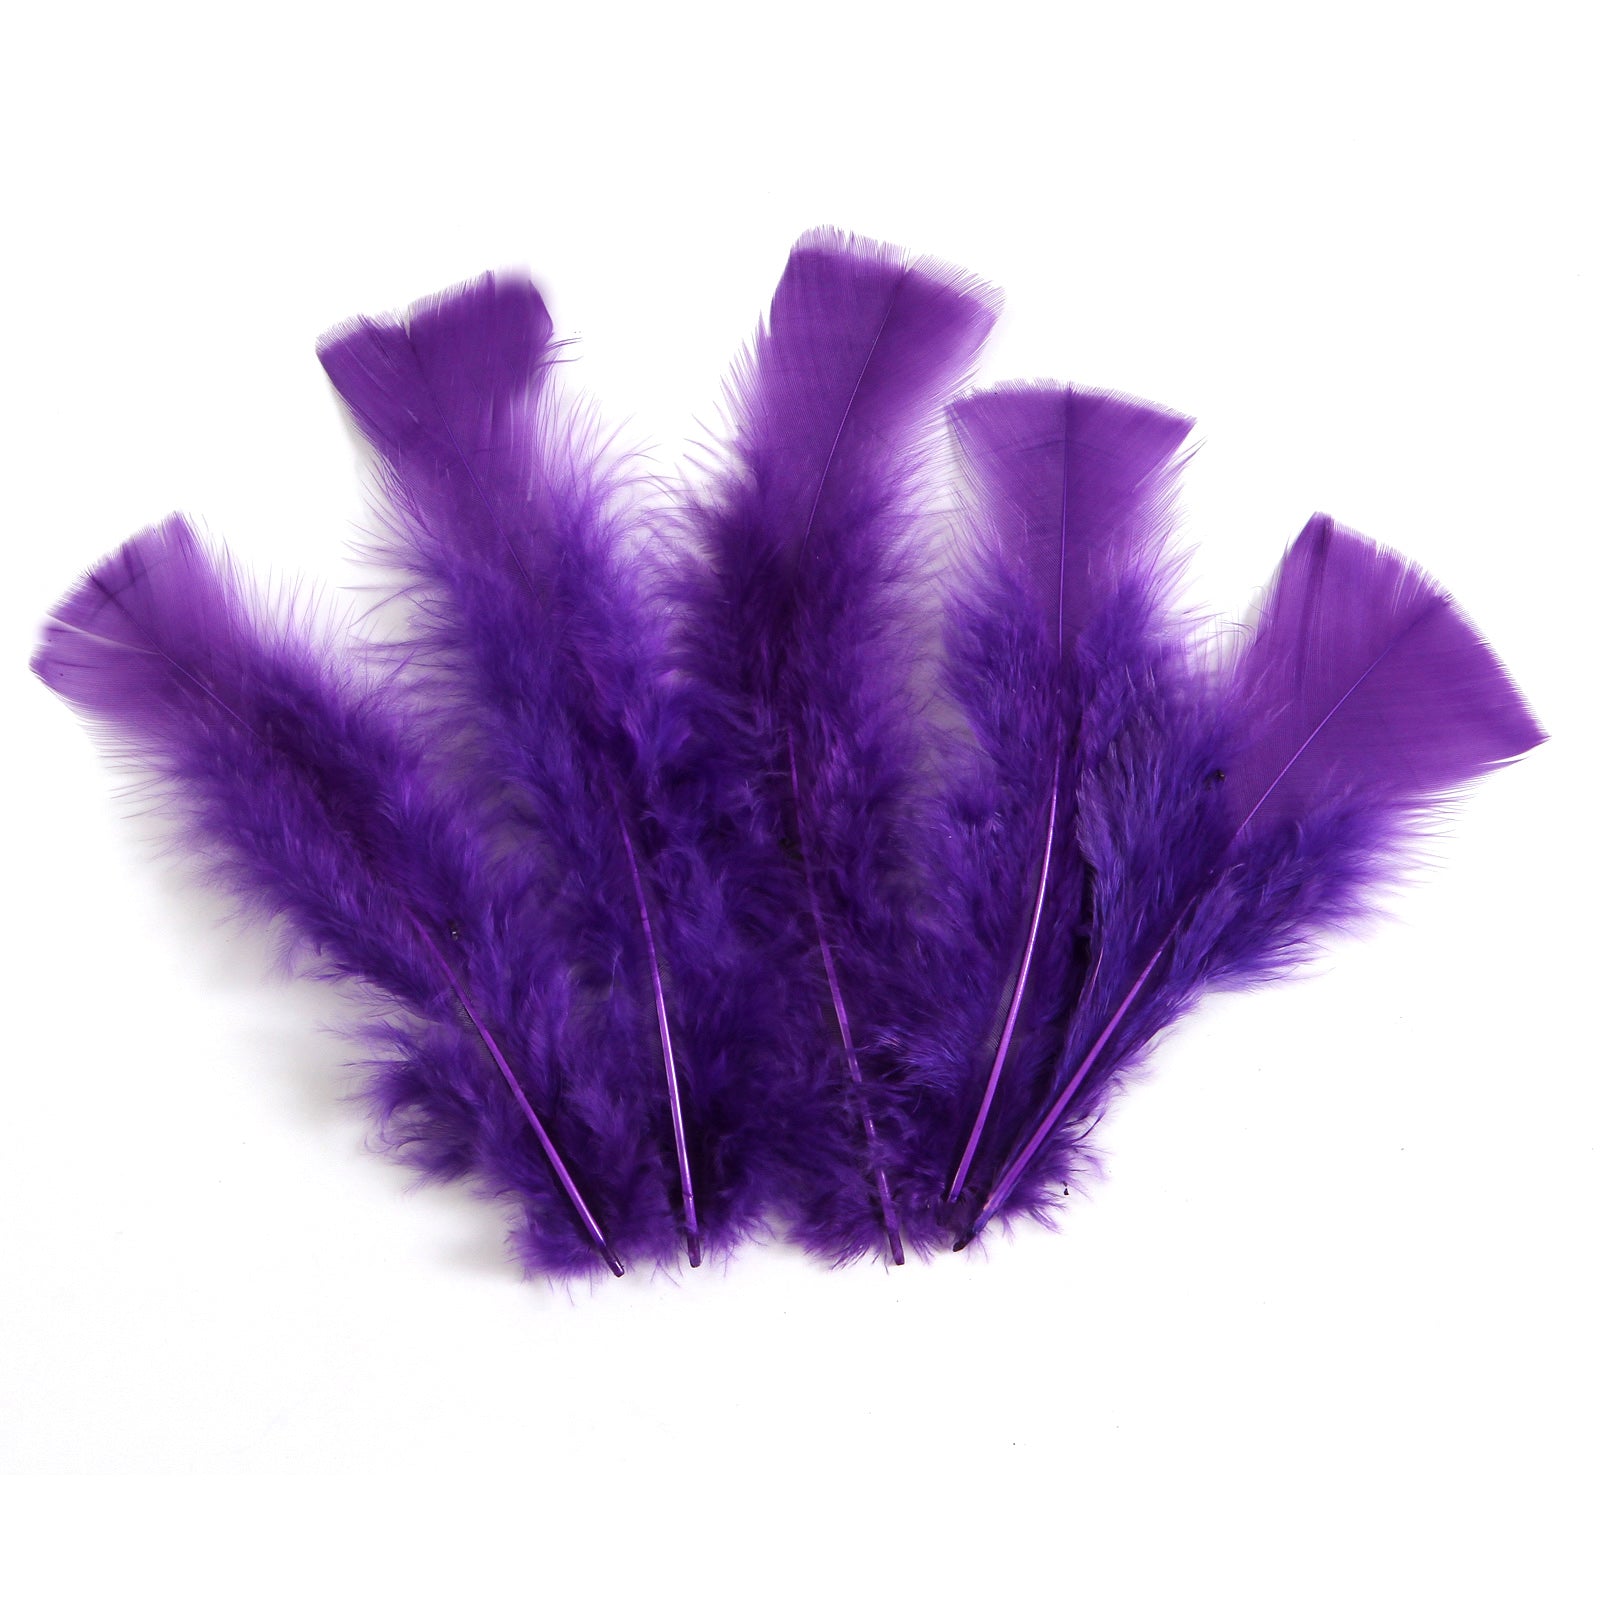 Lavender Turkey Plumage (flats) Craft Feathers per Ounce from